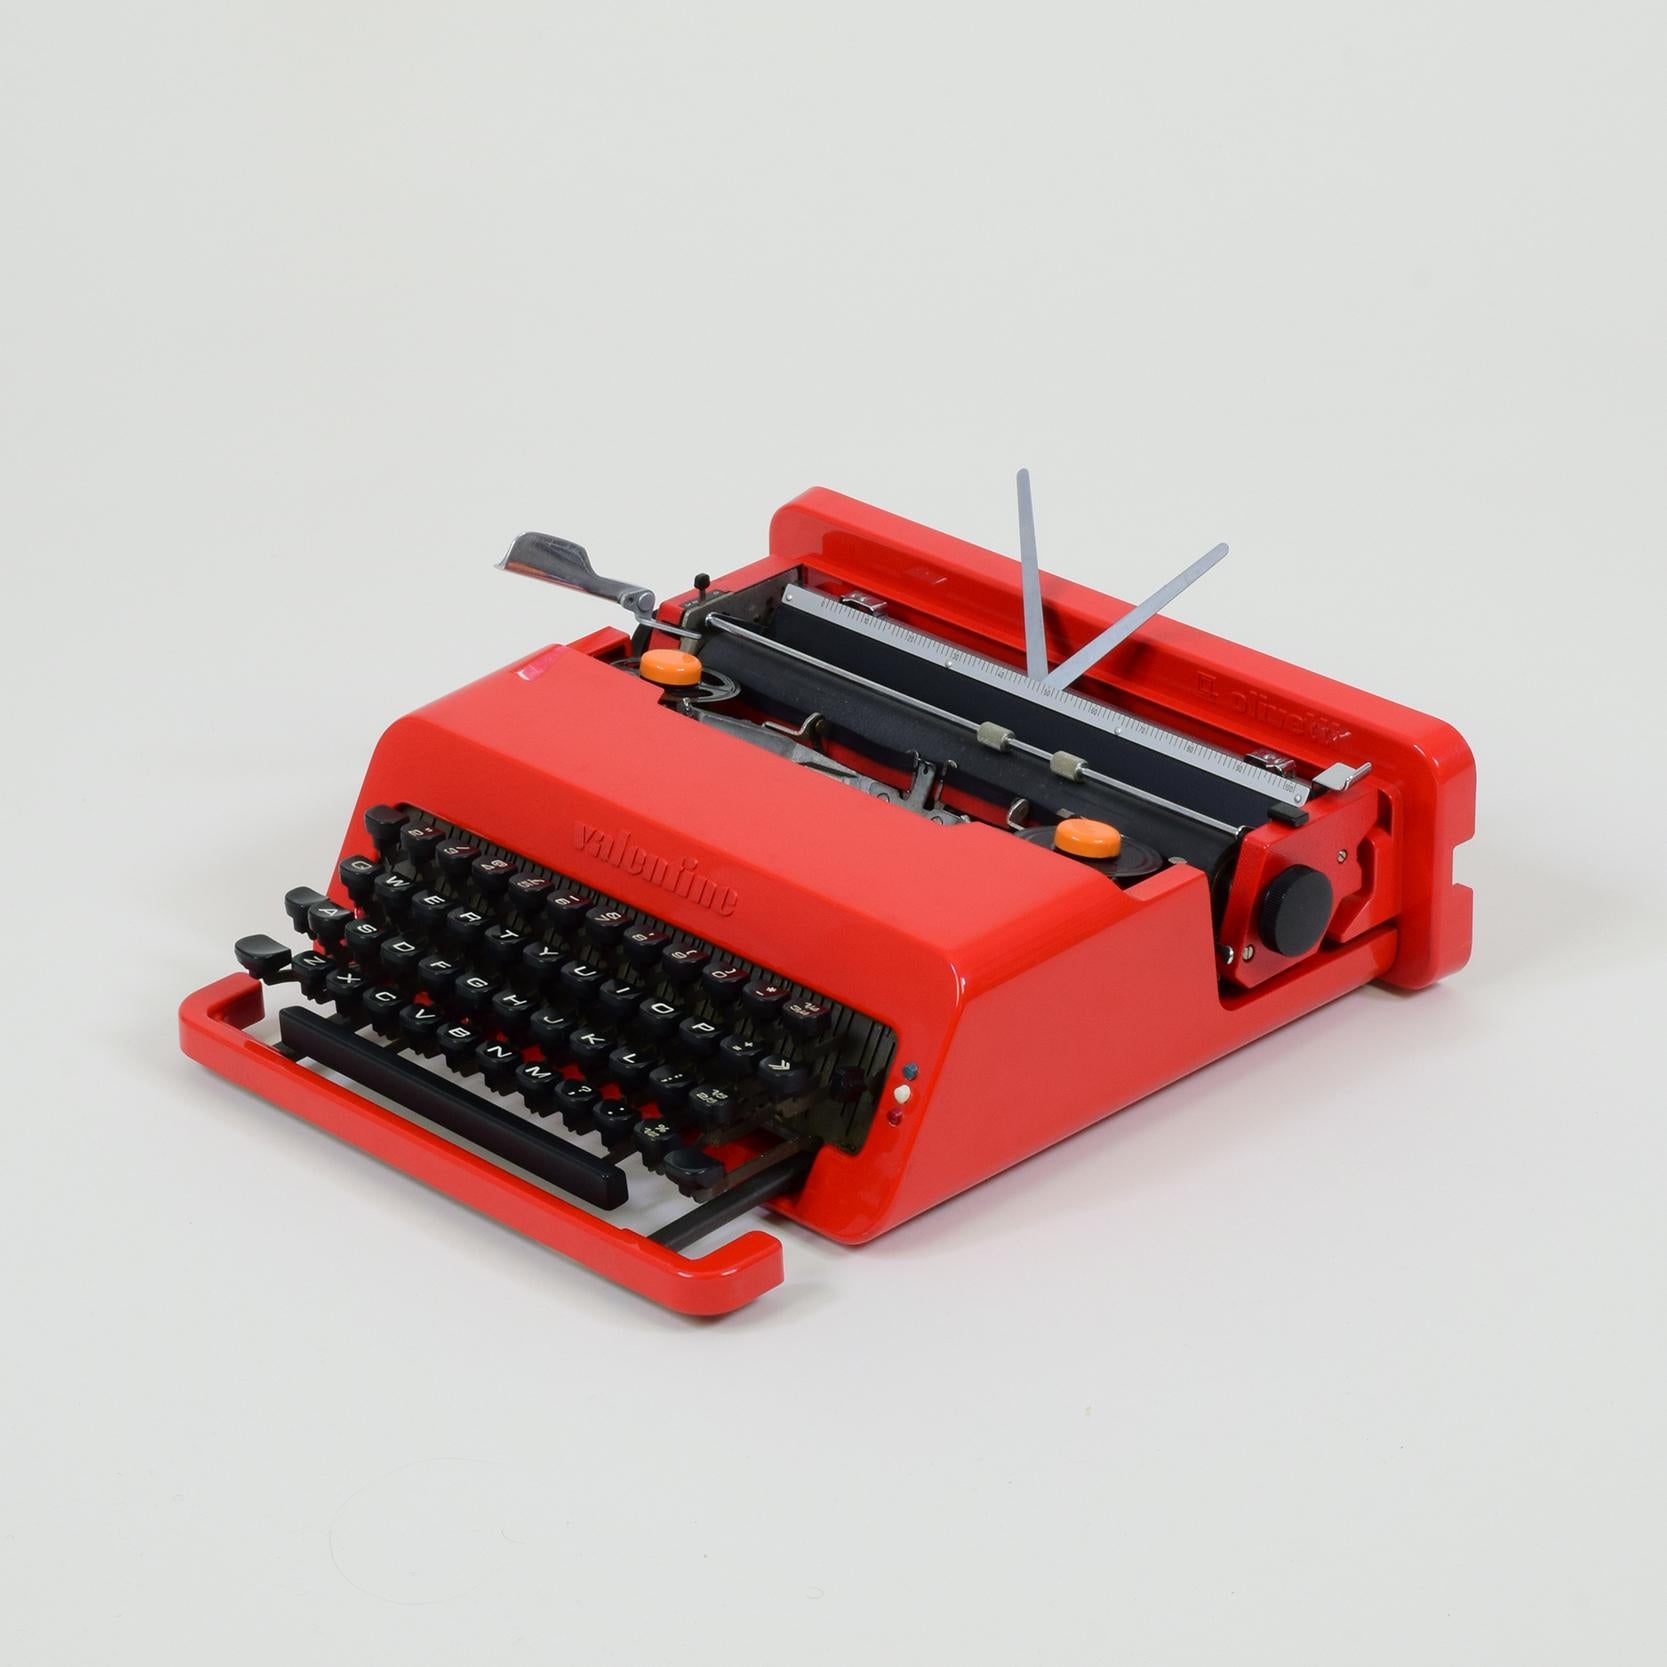 Ettore Sottsass (designer), Austria/Italy
Perry A. King (designer), UK
Olivetti (manufacturer), Italy
Valentine portable typewriter, designed 1968

Red ABS plastic (and other plastics and metals). Original case.

Condition: Fully functional.